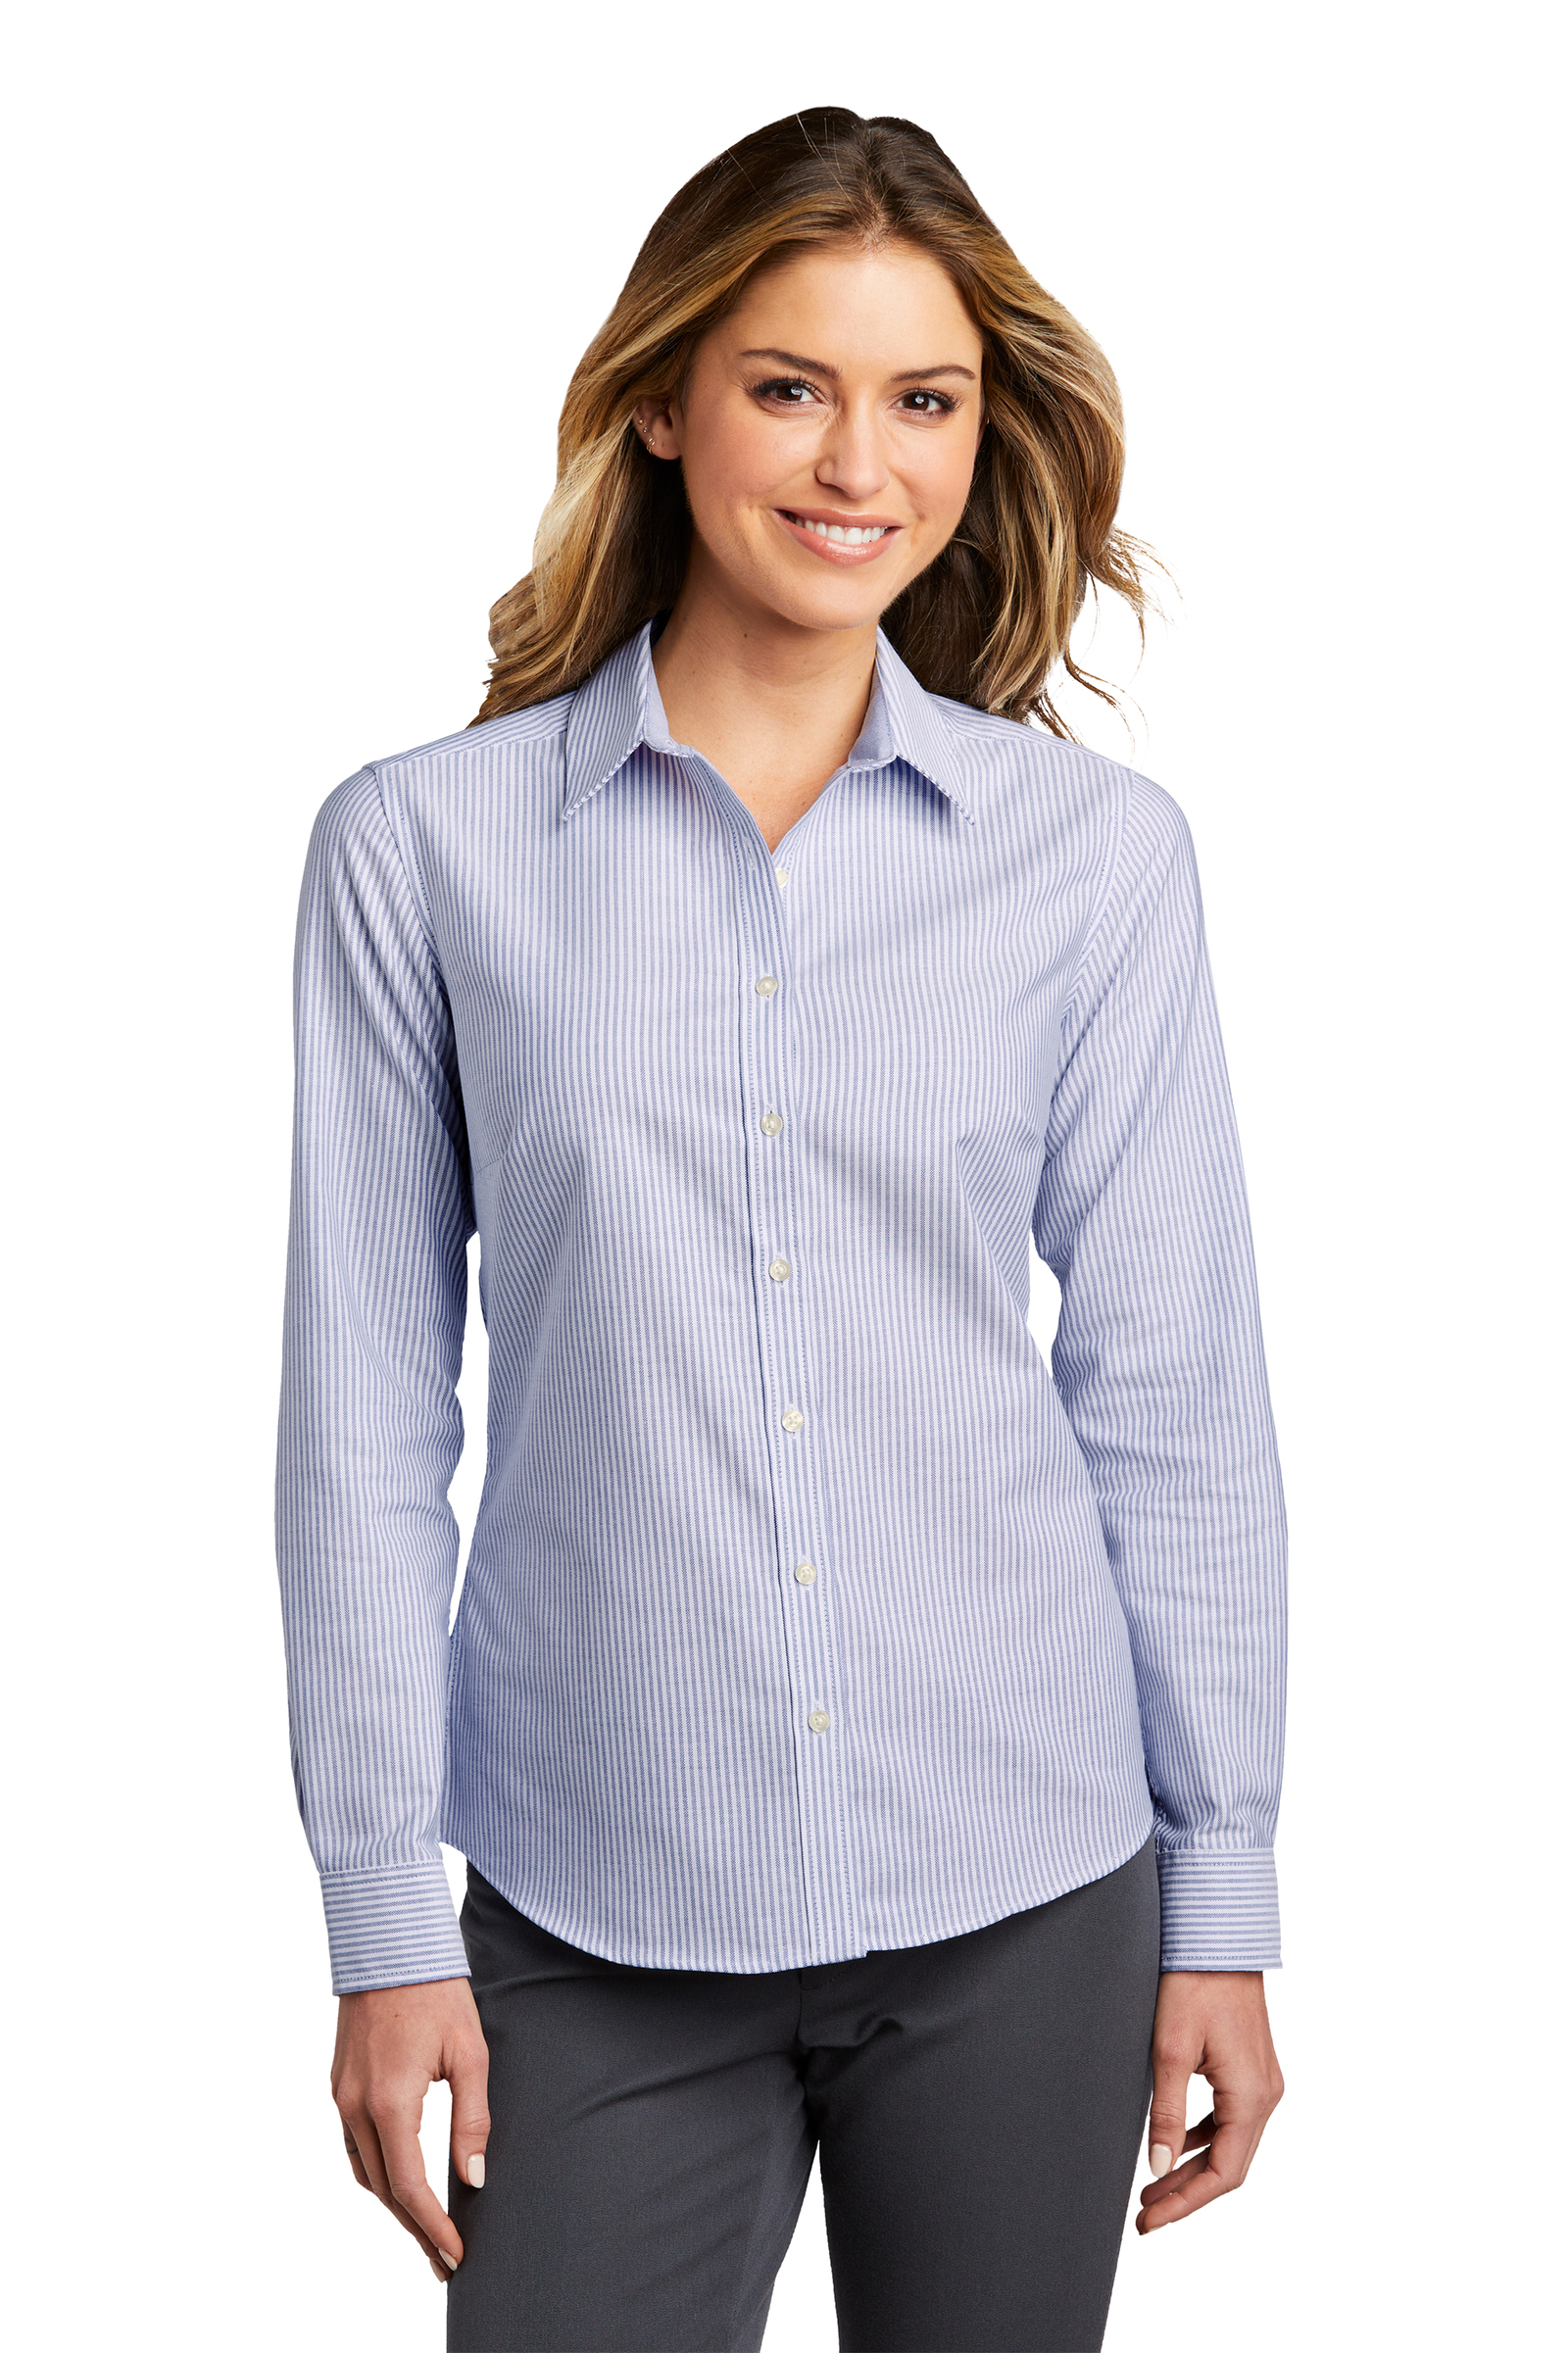 Port Authority Embroidered Women's Oxford SuperPro Stripe Shirt